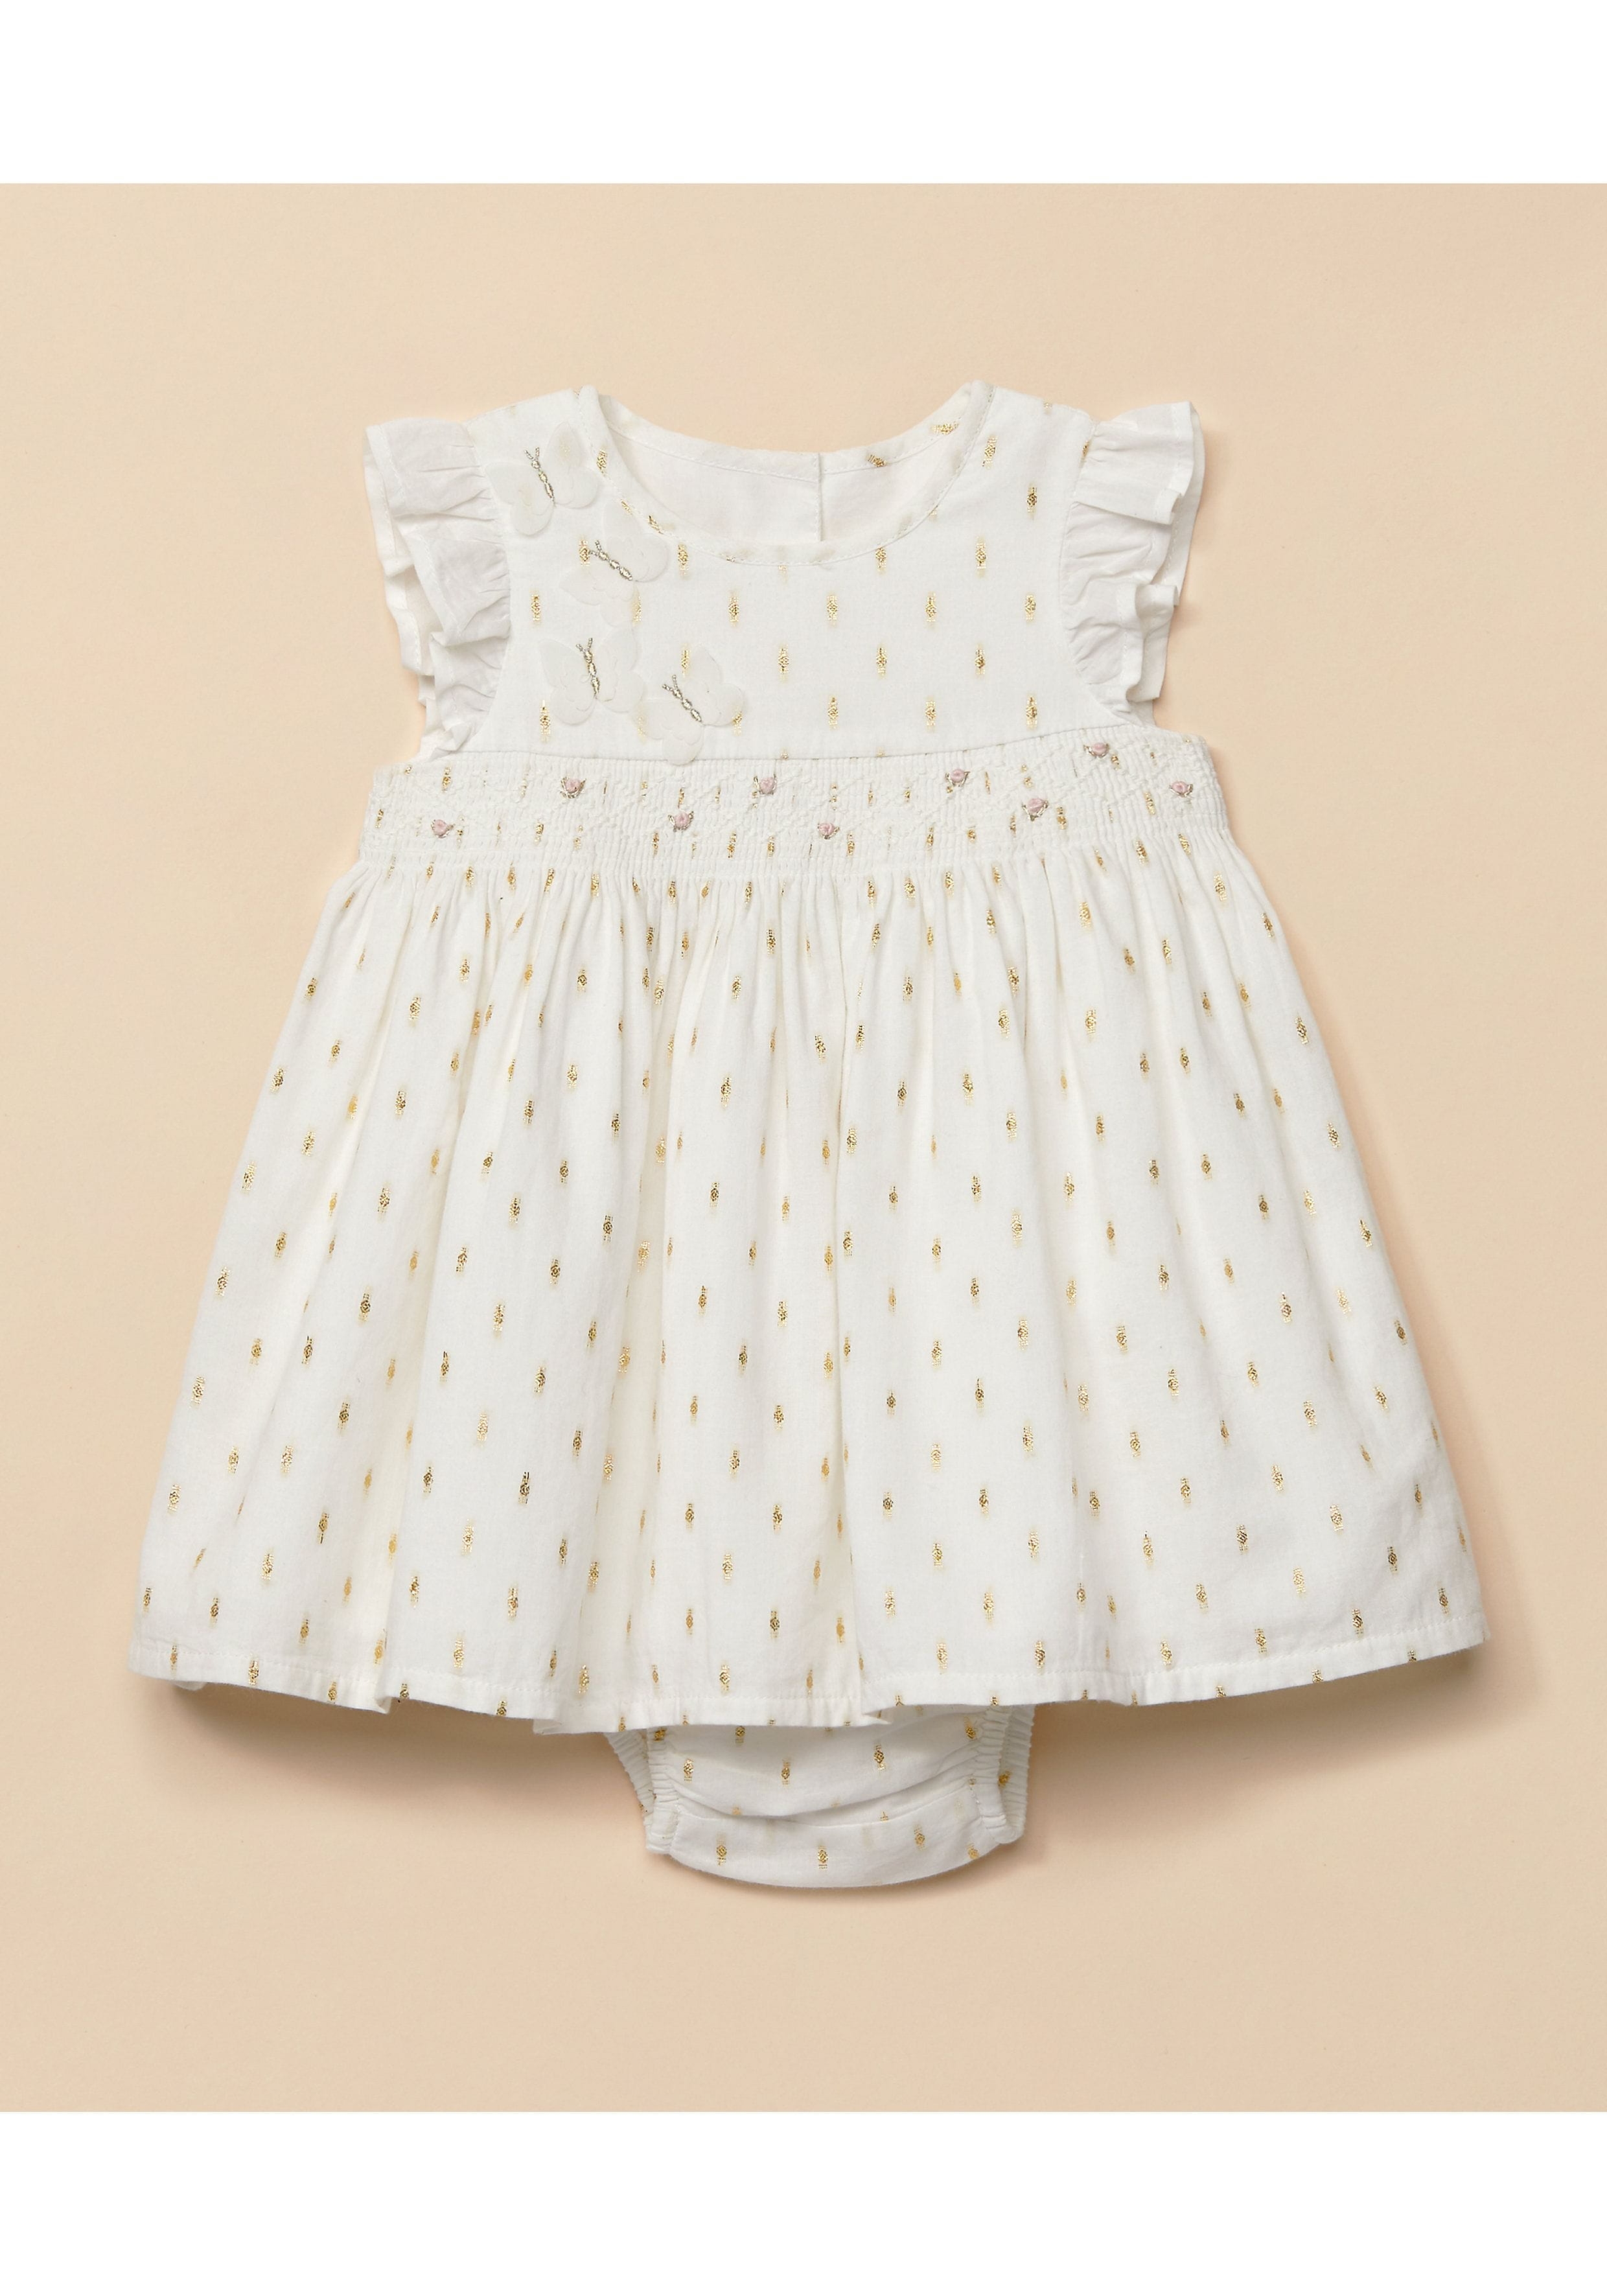 Mothercare | Girls Half Sleeves Sparkle Embroidery Dress - White 0